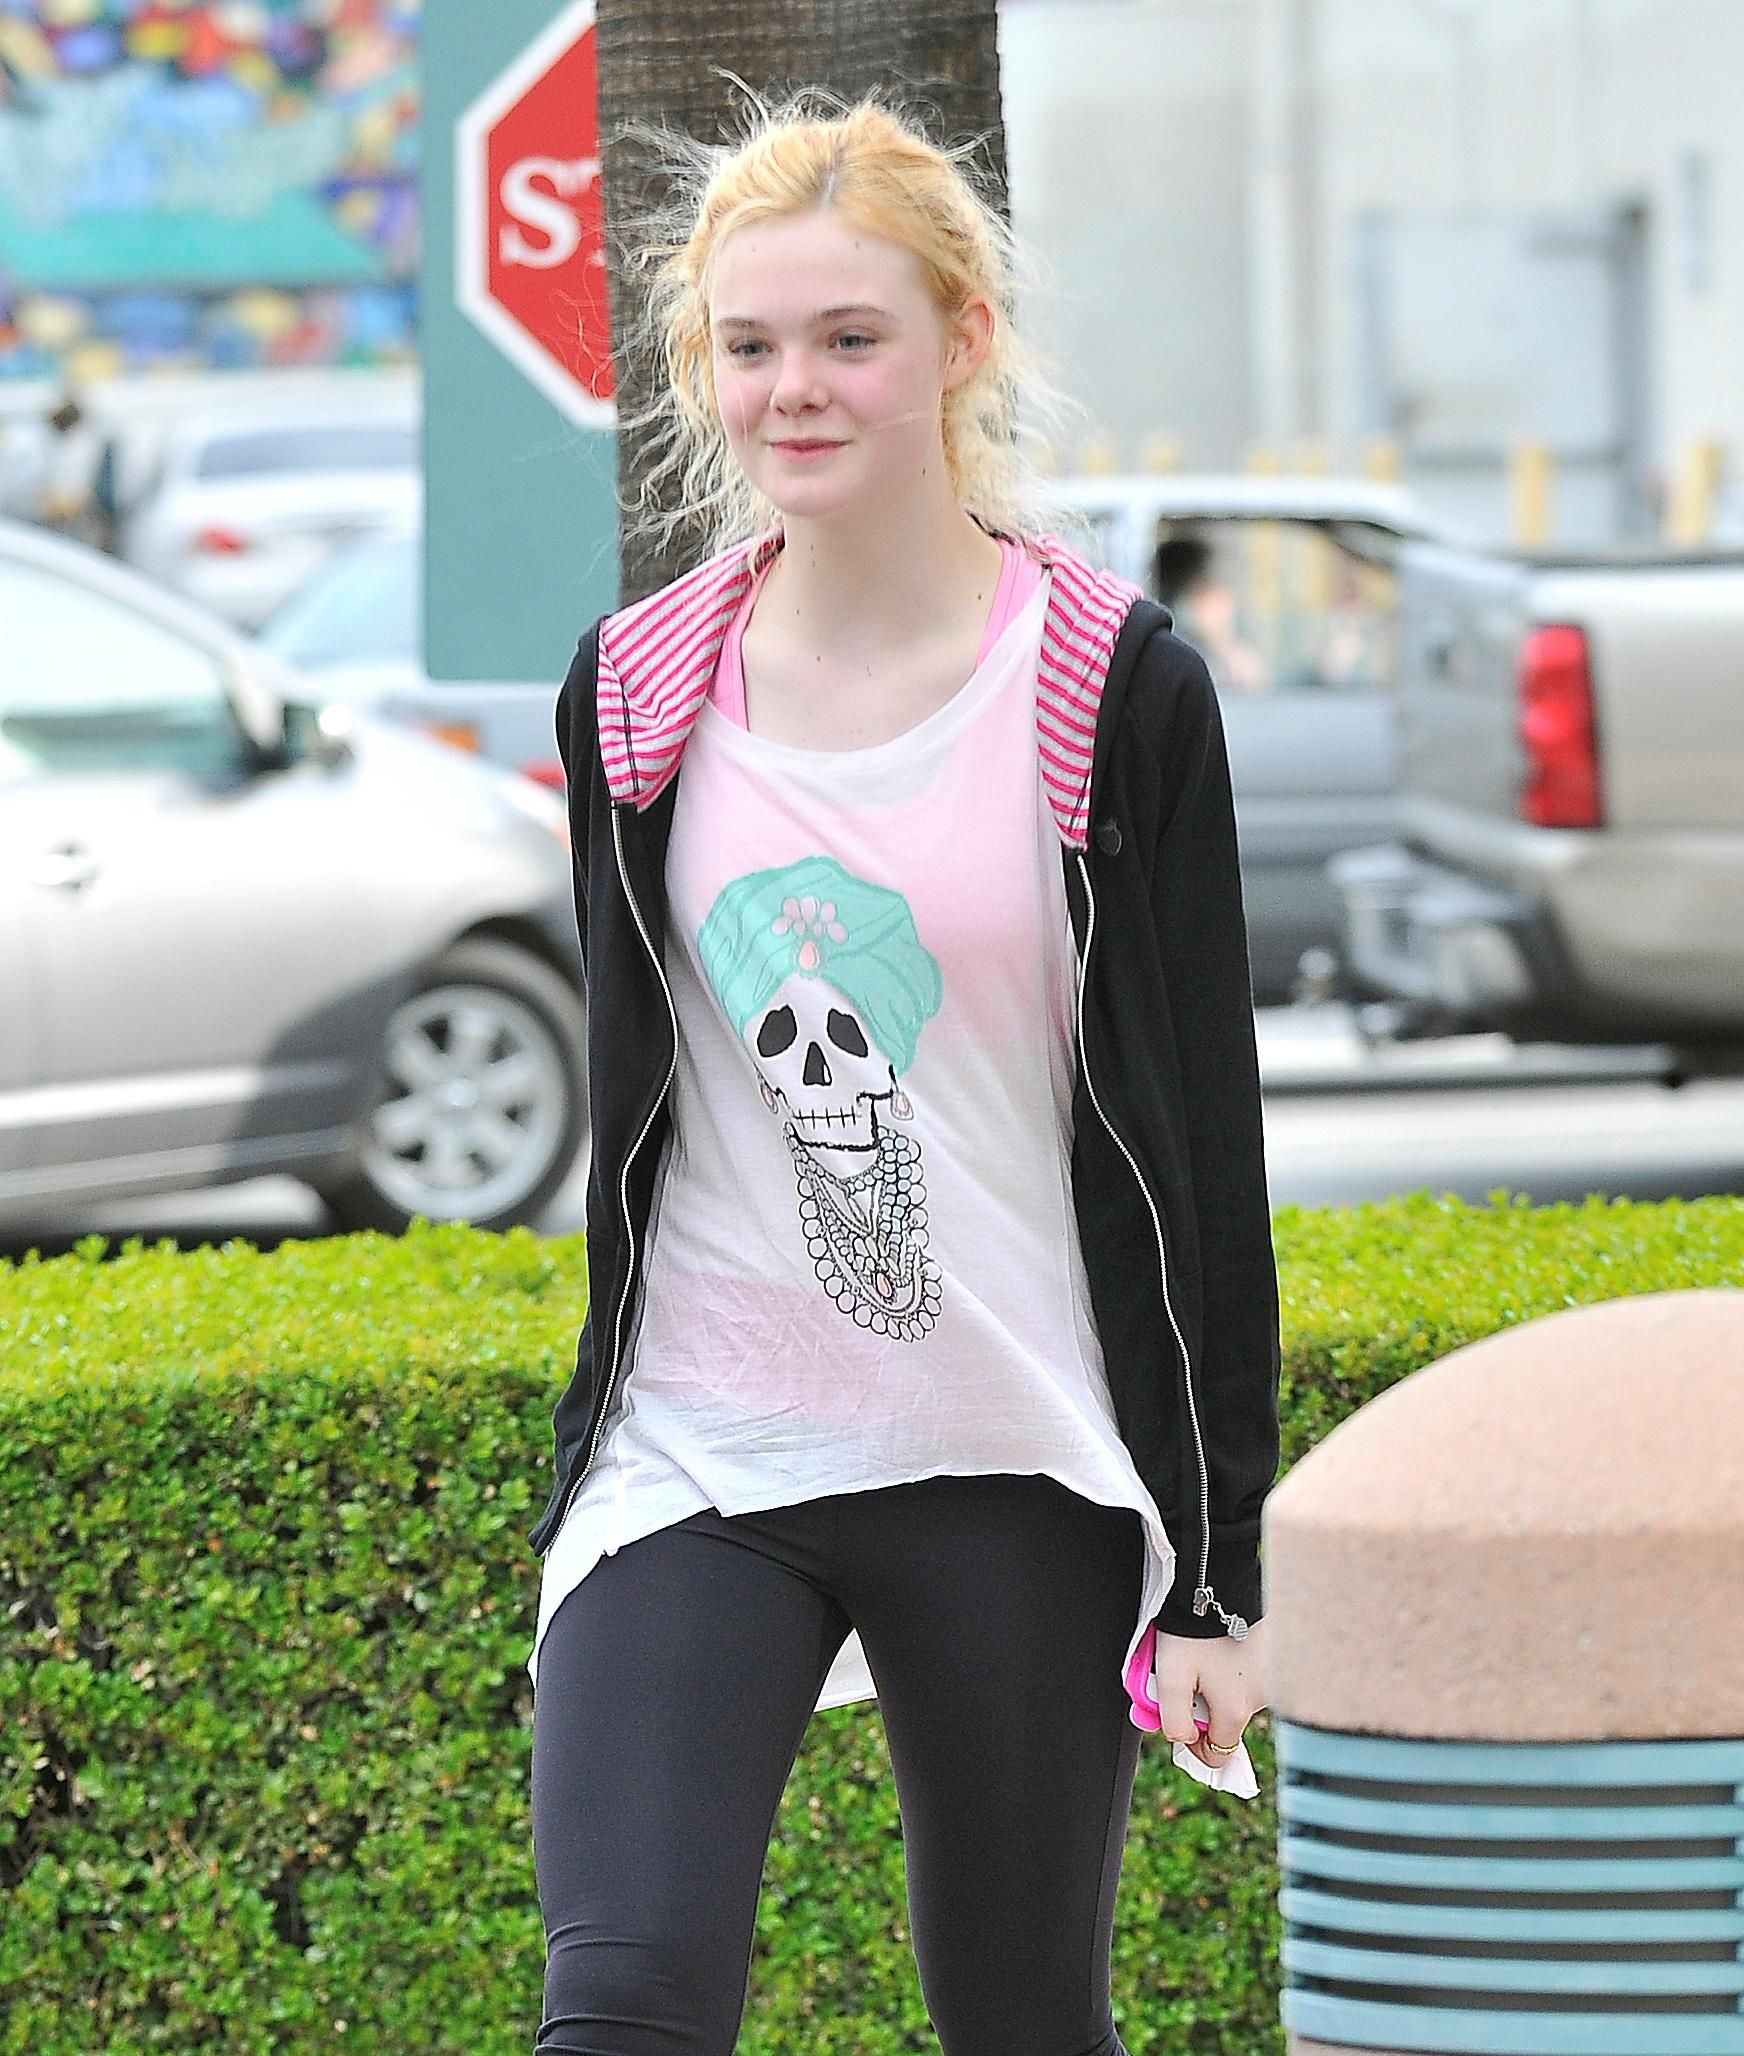 elle fanning, images, image, wallpaper, photos, photo, photograph, gallery,...